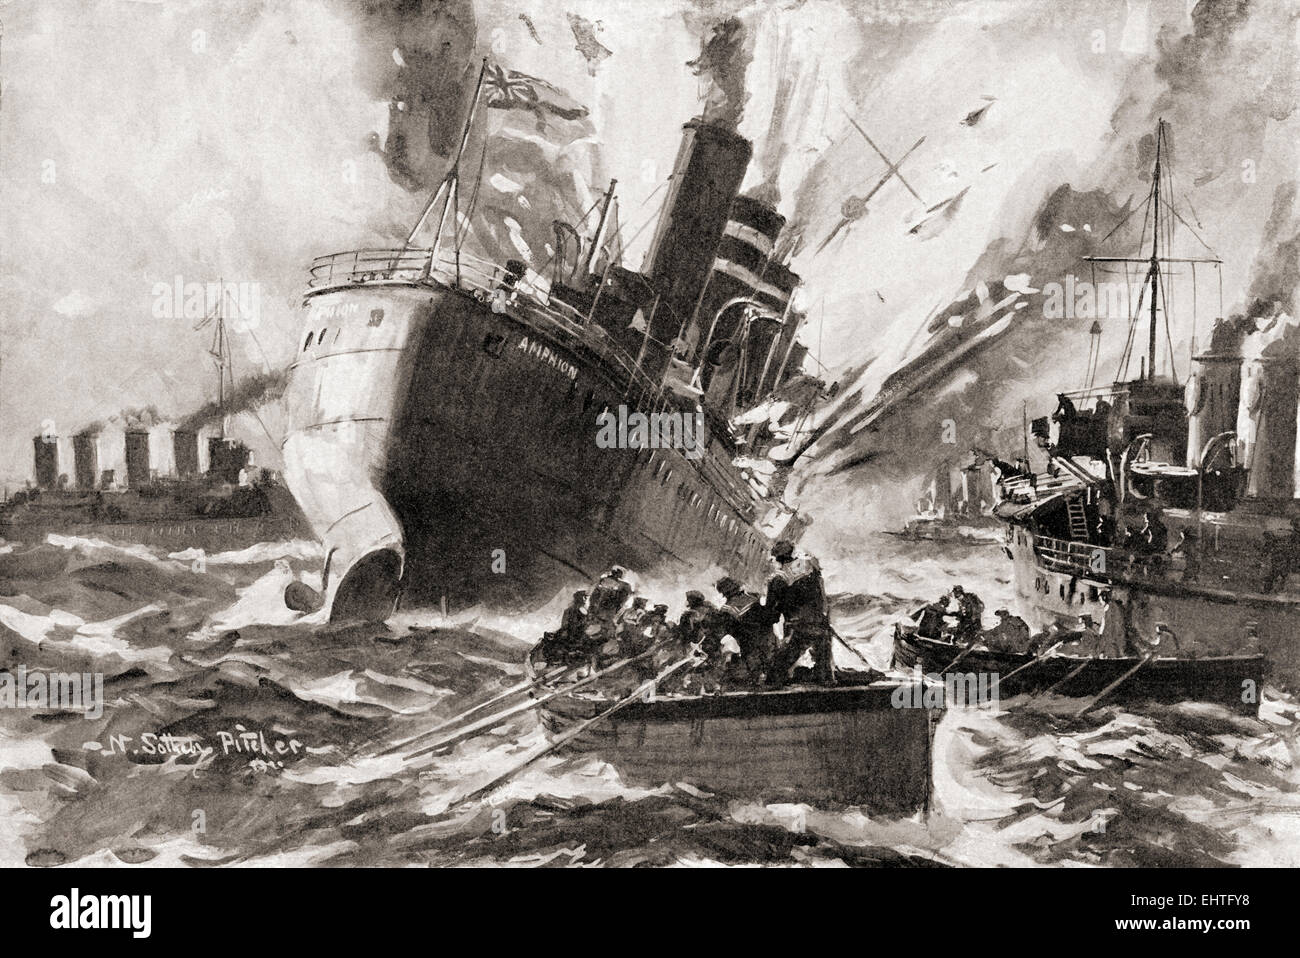 The blowing up of H.M.S. Amphion by a German mine during World War One. Stock Photo